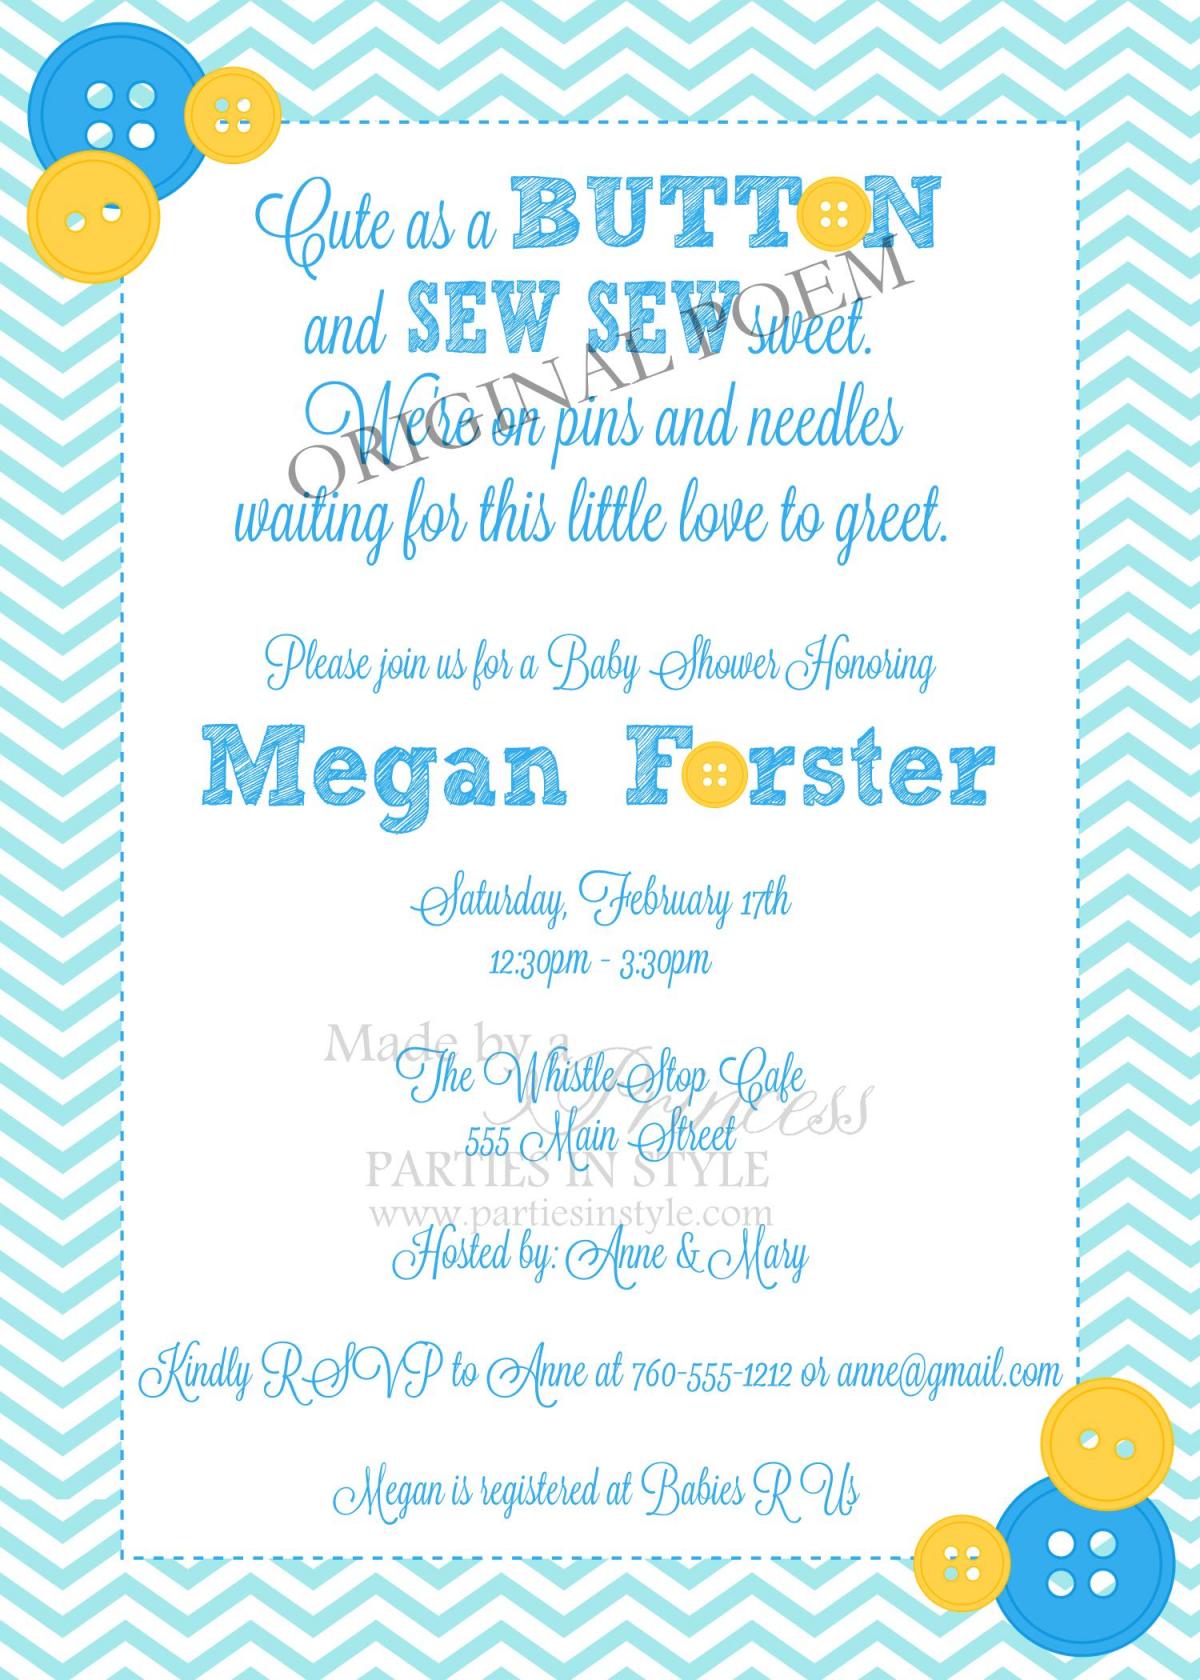 Baby Shower Invitation - Cute As A Button In Blue & Yellow - Printable Diy